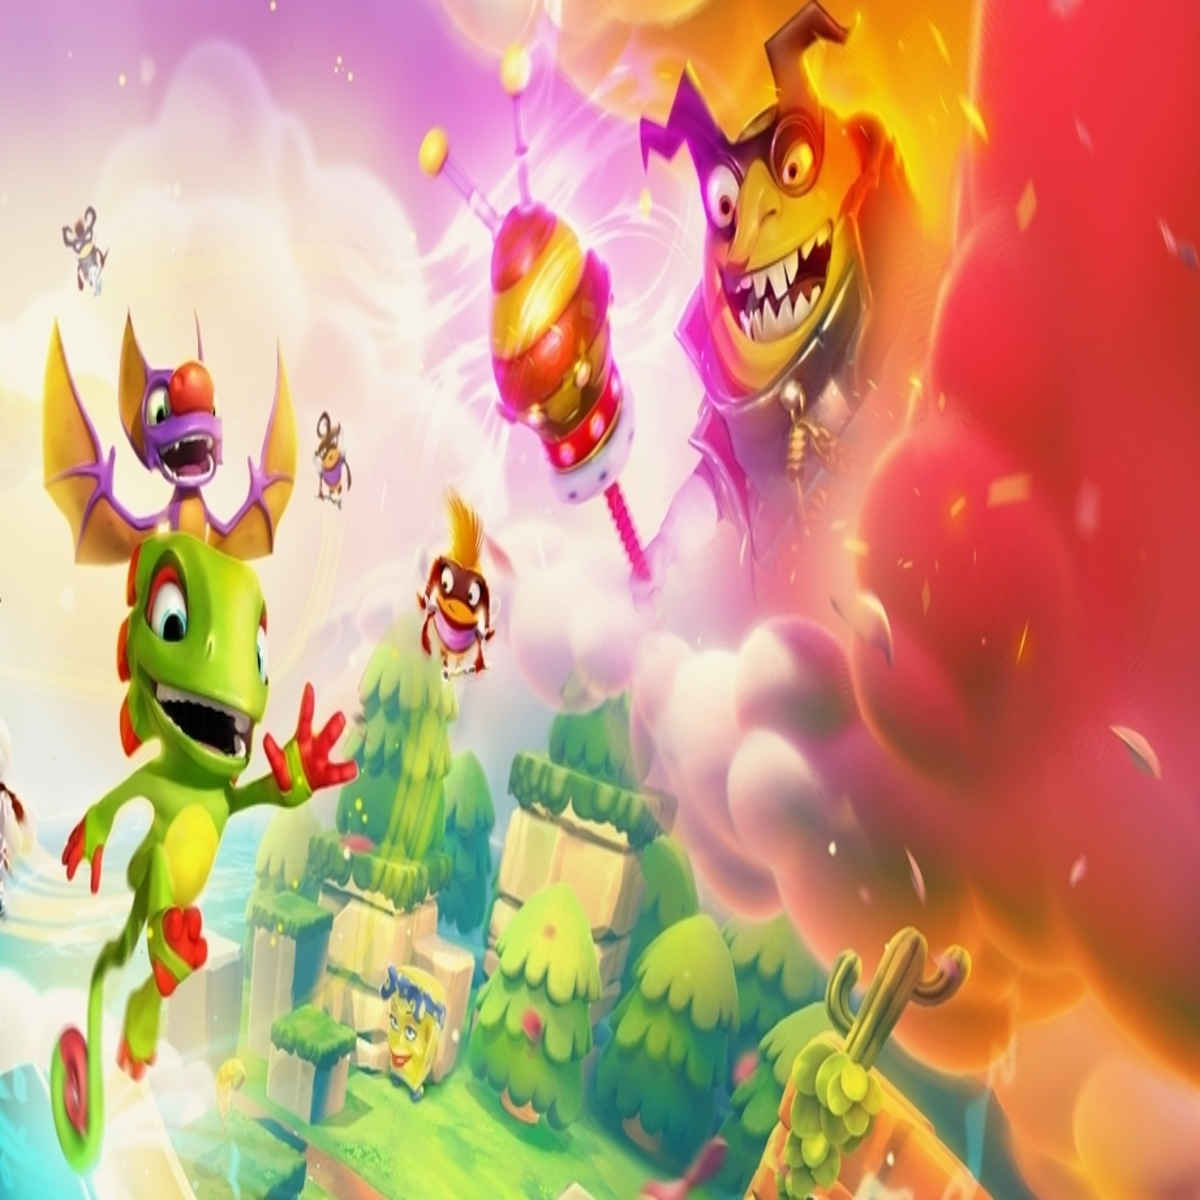 Yooka-Laylee and the Impossible Lair comes to PC and consoles next month